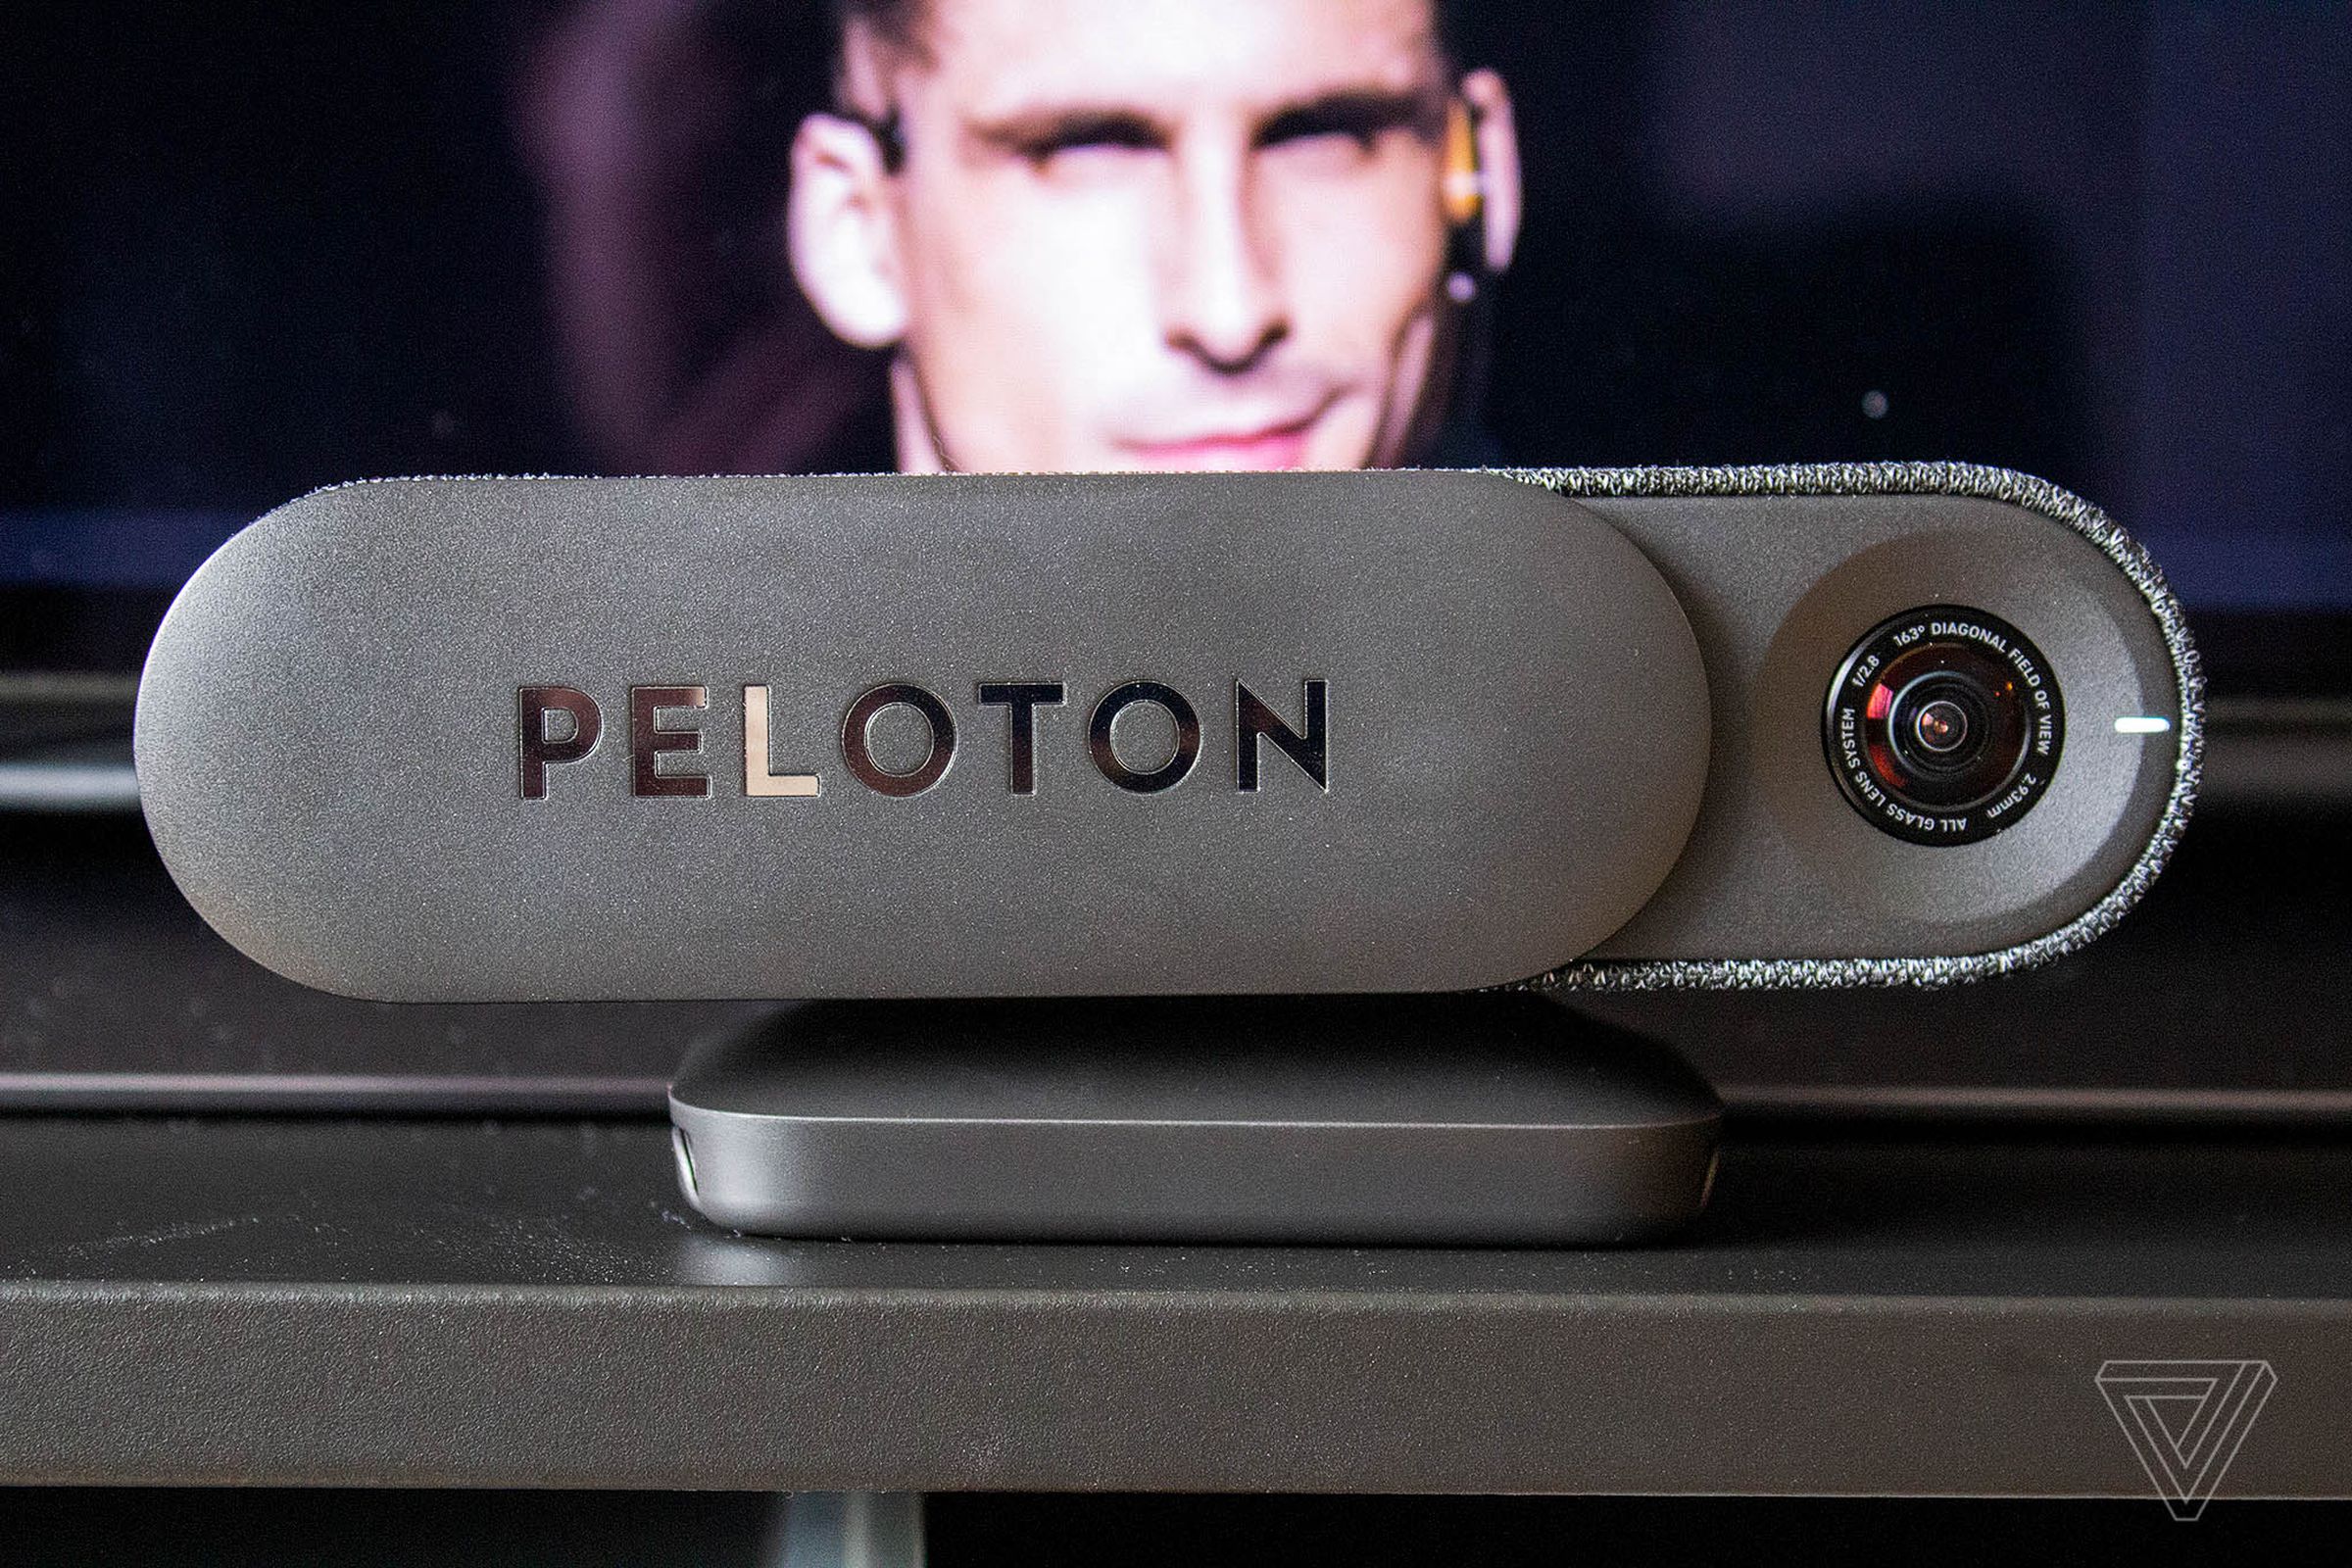 The Peloton Guide with the camera open in front of a TV